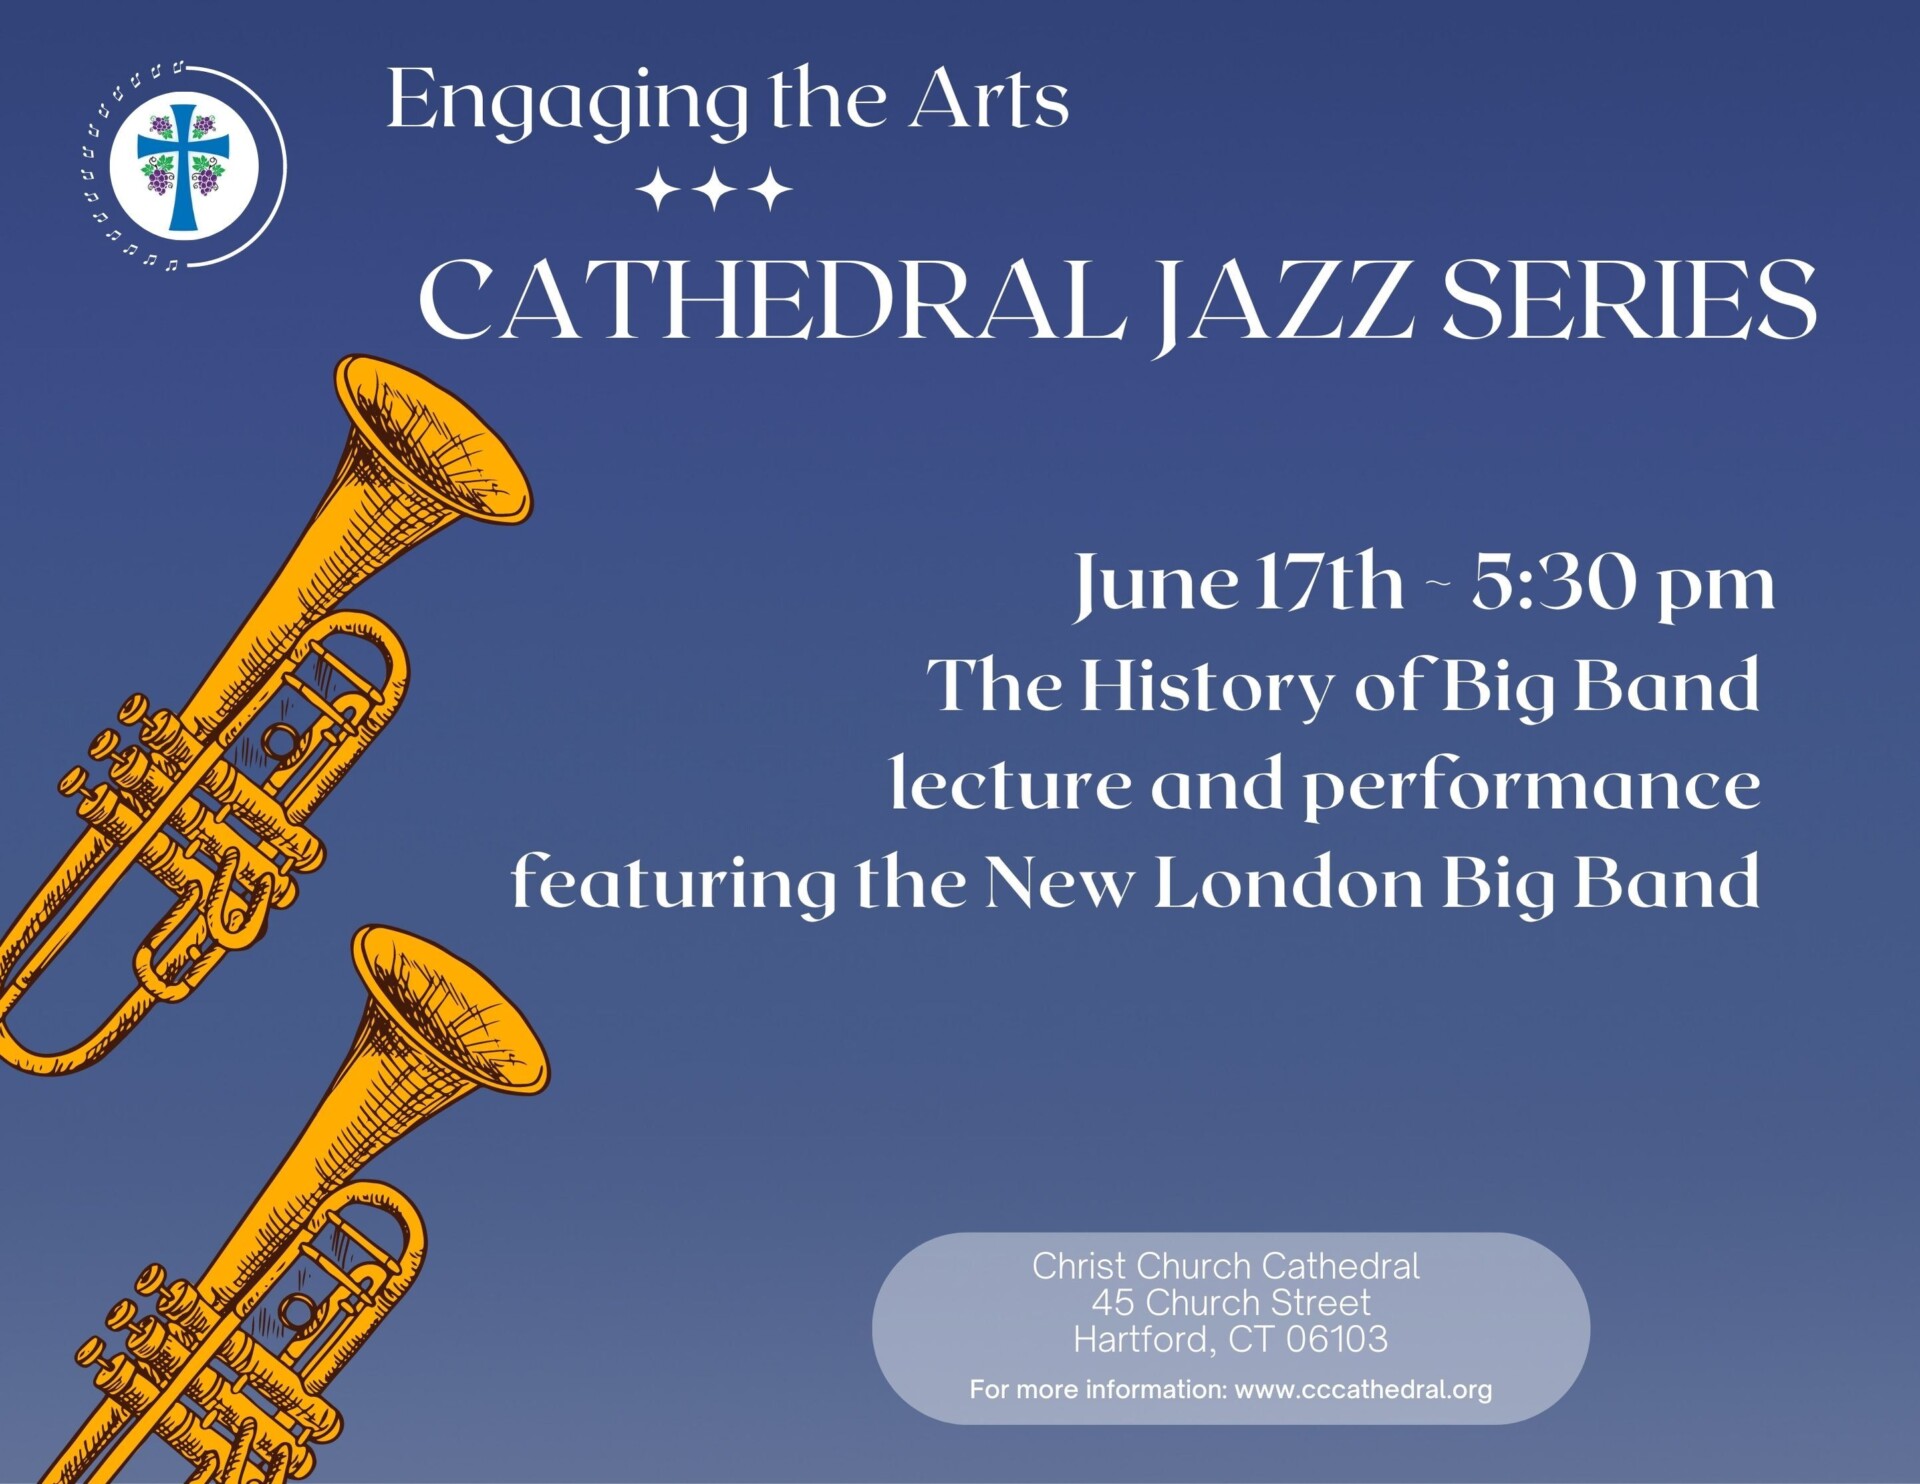 The History of Big Band lecture and performance featuring the New London Big Band